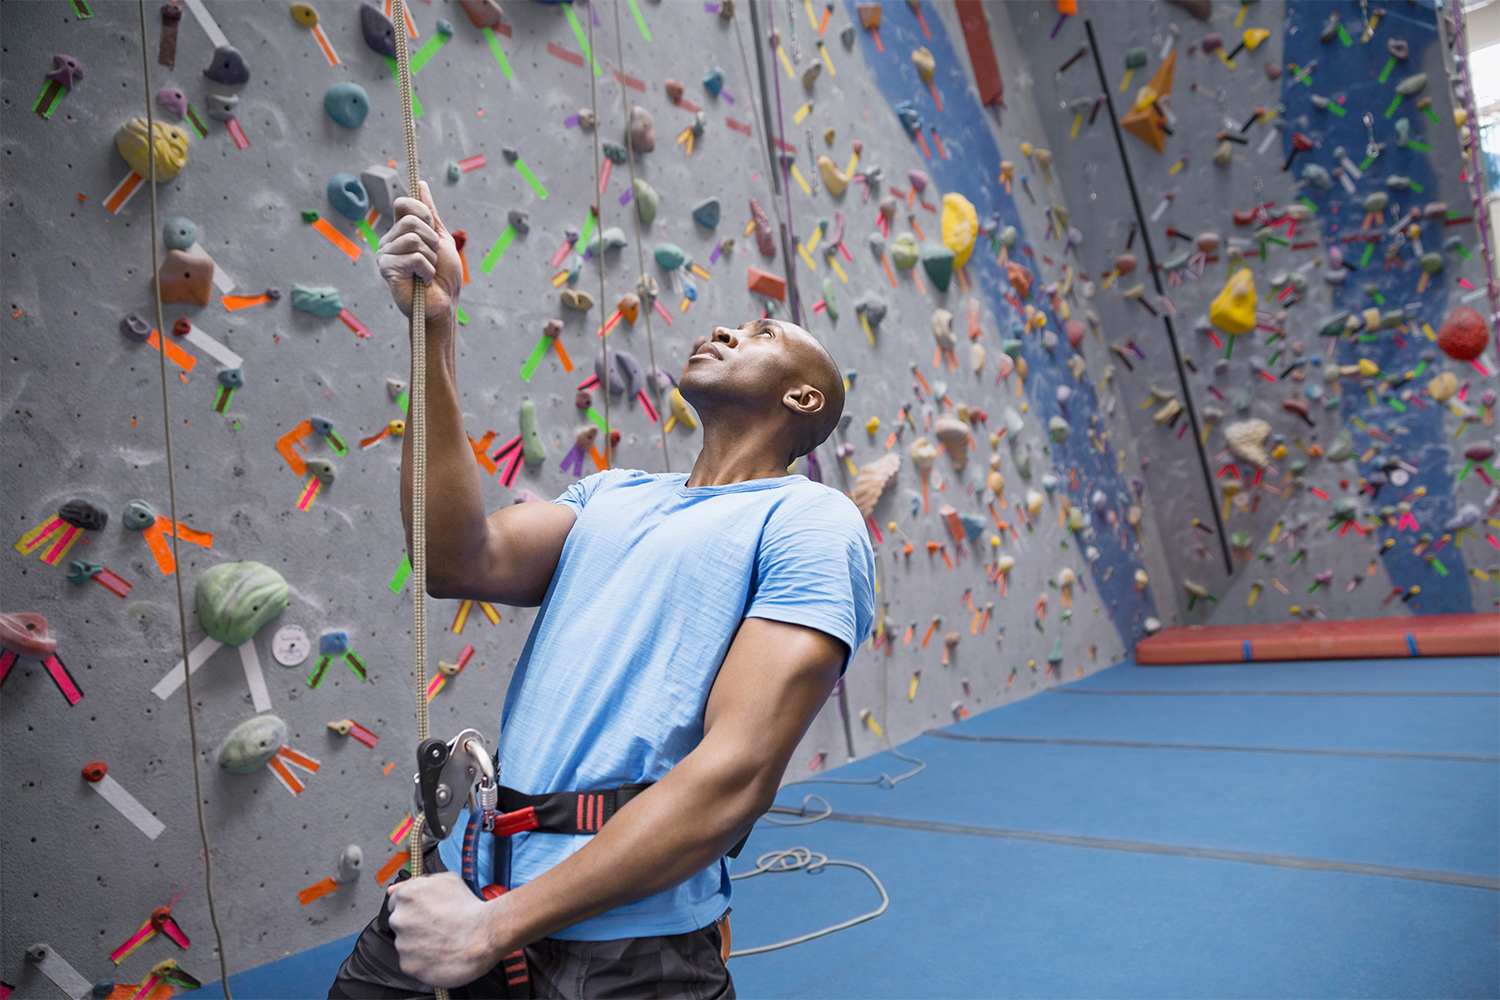 The Essential List of Best Gear for the Climbing Gym - The Manual